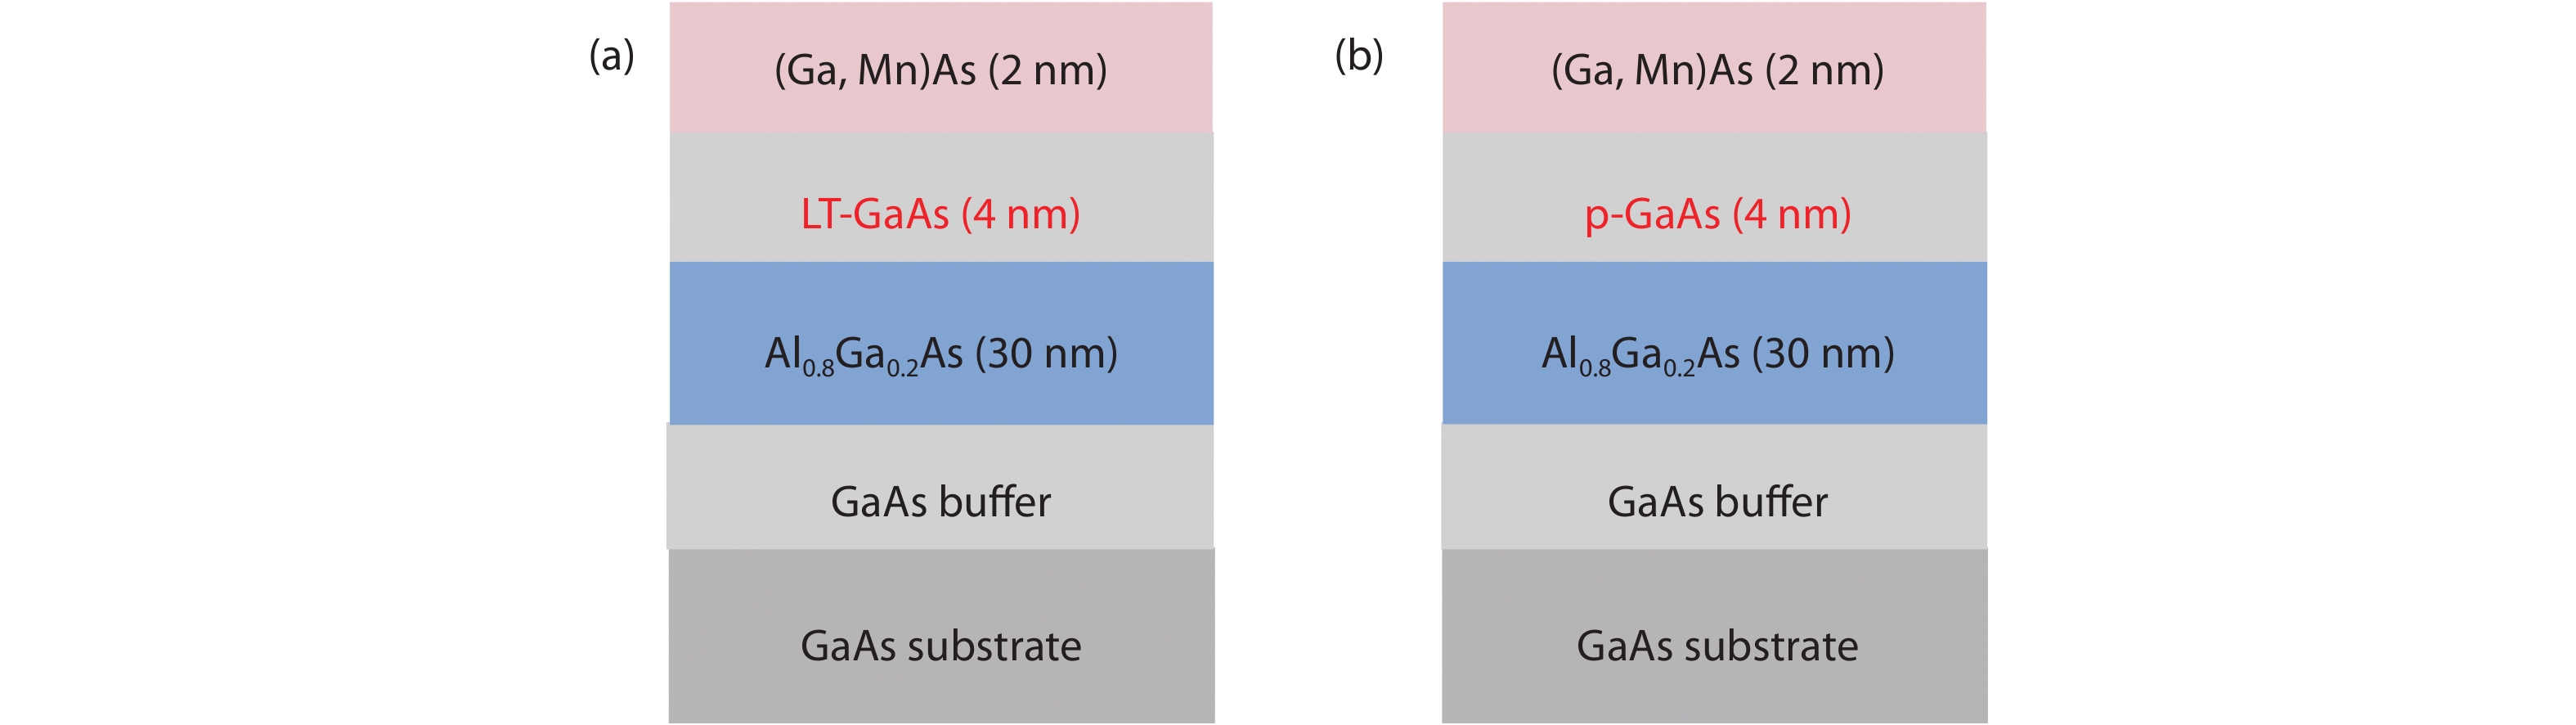 (Color online) Schematic diagrams of the layer structure for (a) series-A and (b) series-B samples. The (Al,Ga)As buffer layer plays the role of an energy barrier, and the low-temperature grown n-type GaAs in series-A samples will deplete the holes in (Ga,Mn)As film to some extent, while the heavily-doped p-type GaAs layers in series-B samples are used to suppress the hole depletion.